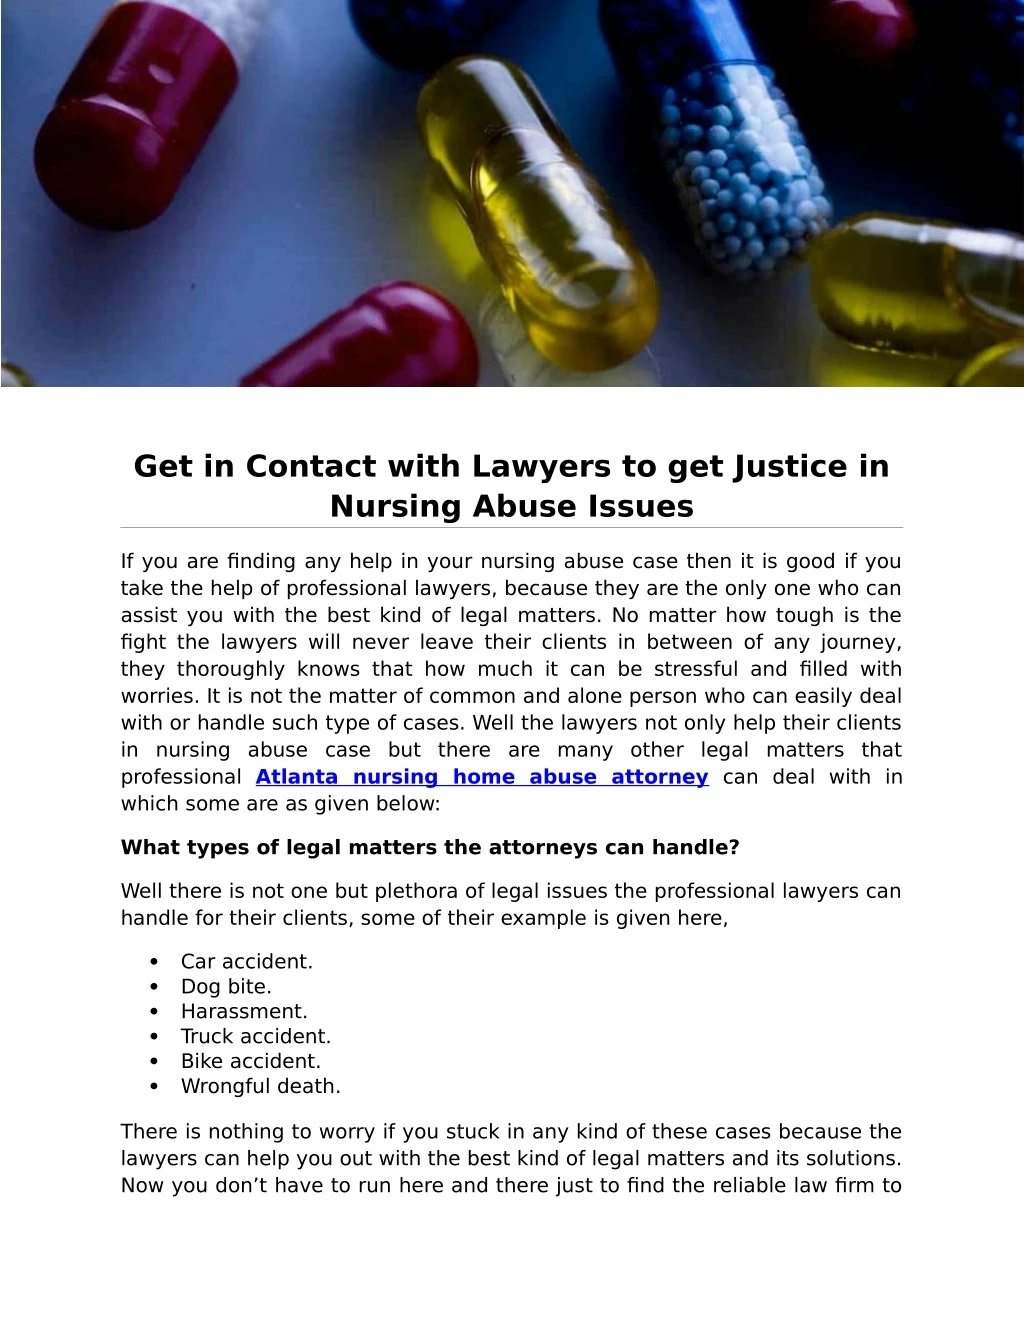 get in contact with lawyers to get justice